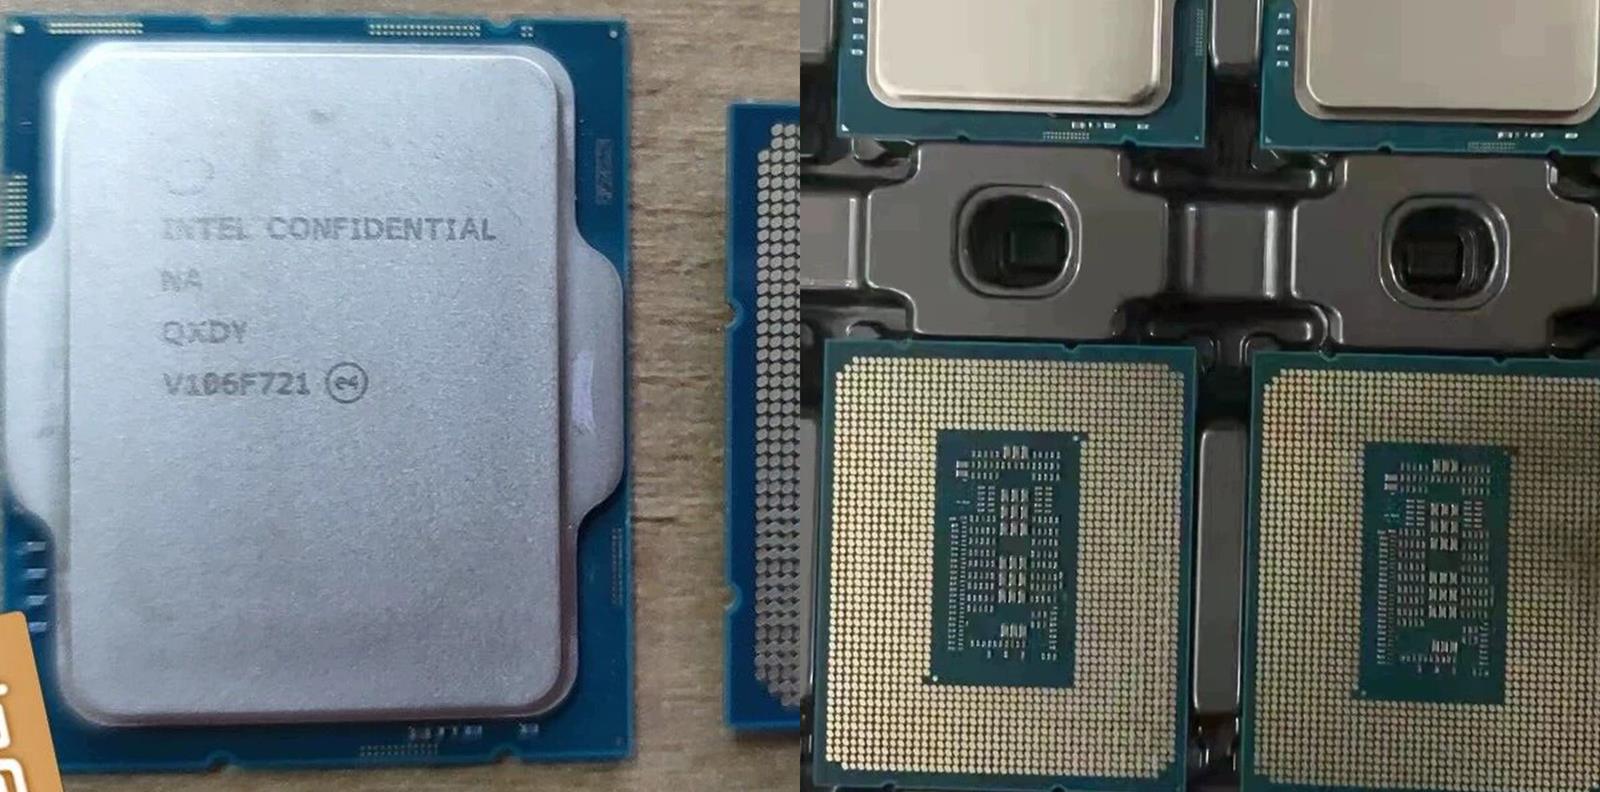 Engineering samples Intel Core i5-12400 already available for purchase, but it's better not to do it